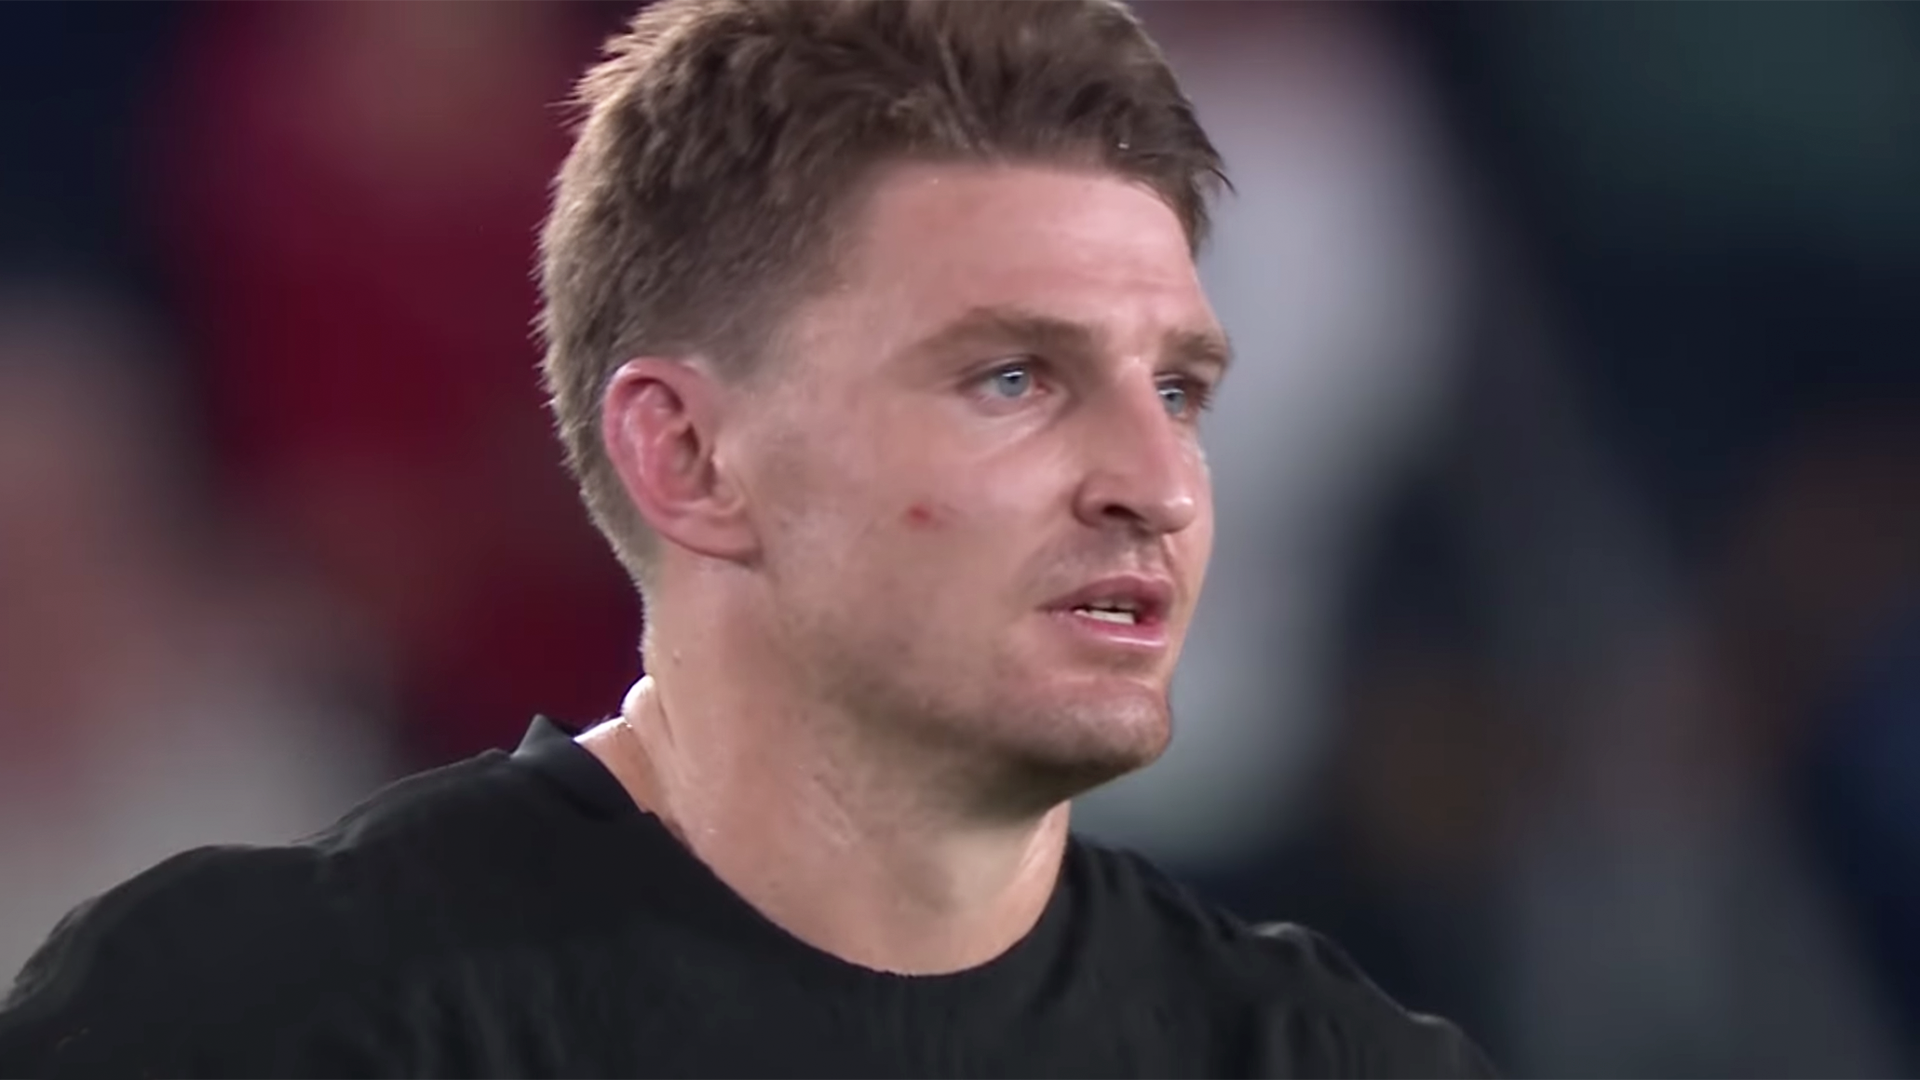 Fans fear for safety of Beauden Barrett after rugby star posts worrying message on social media